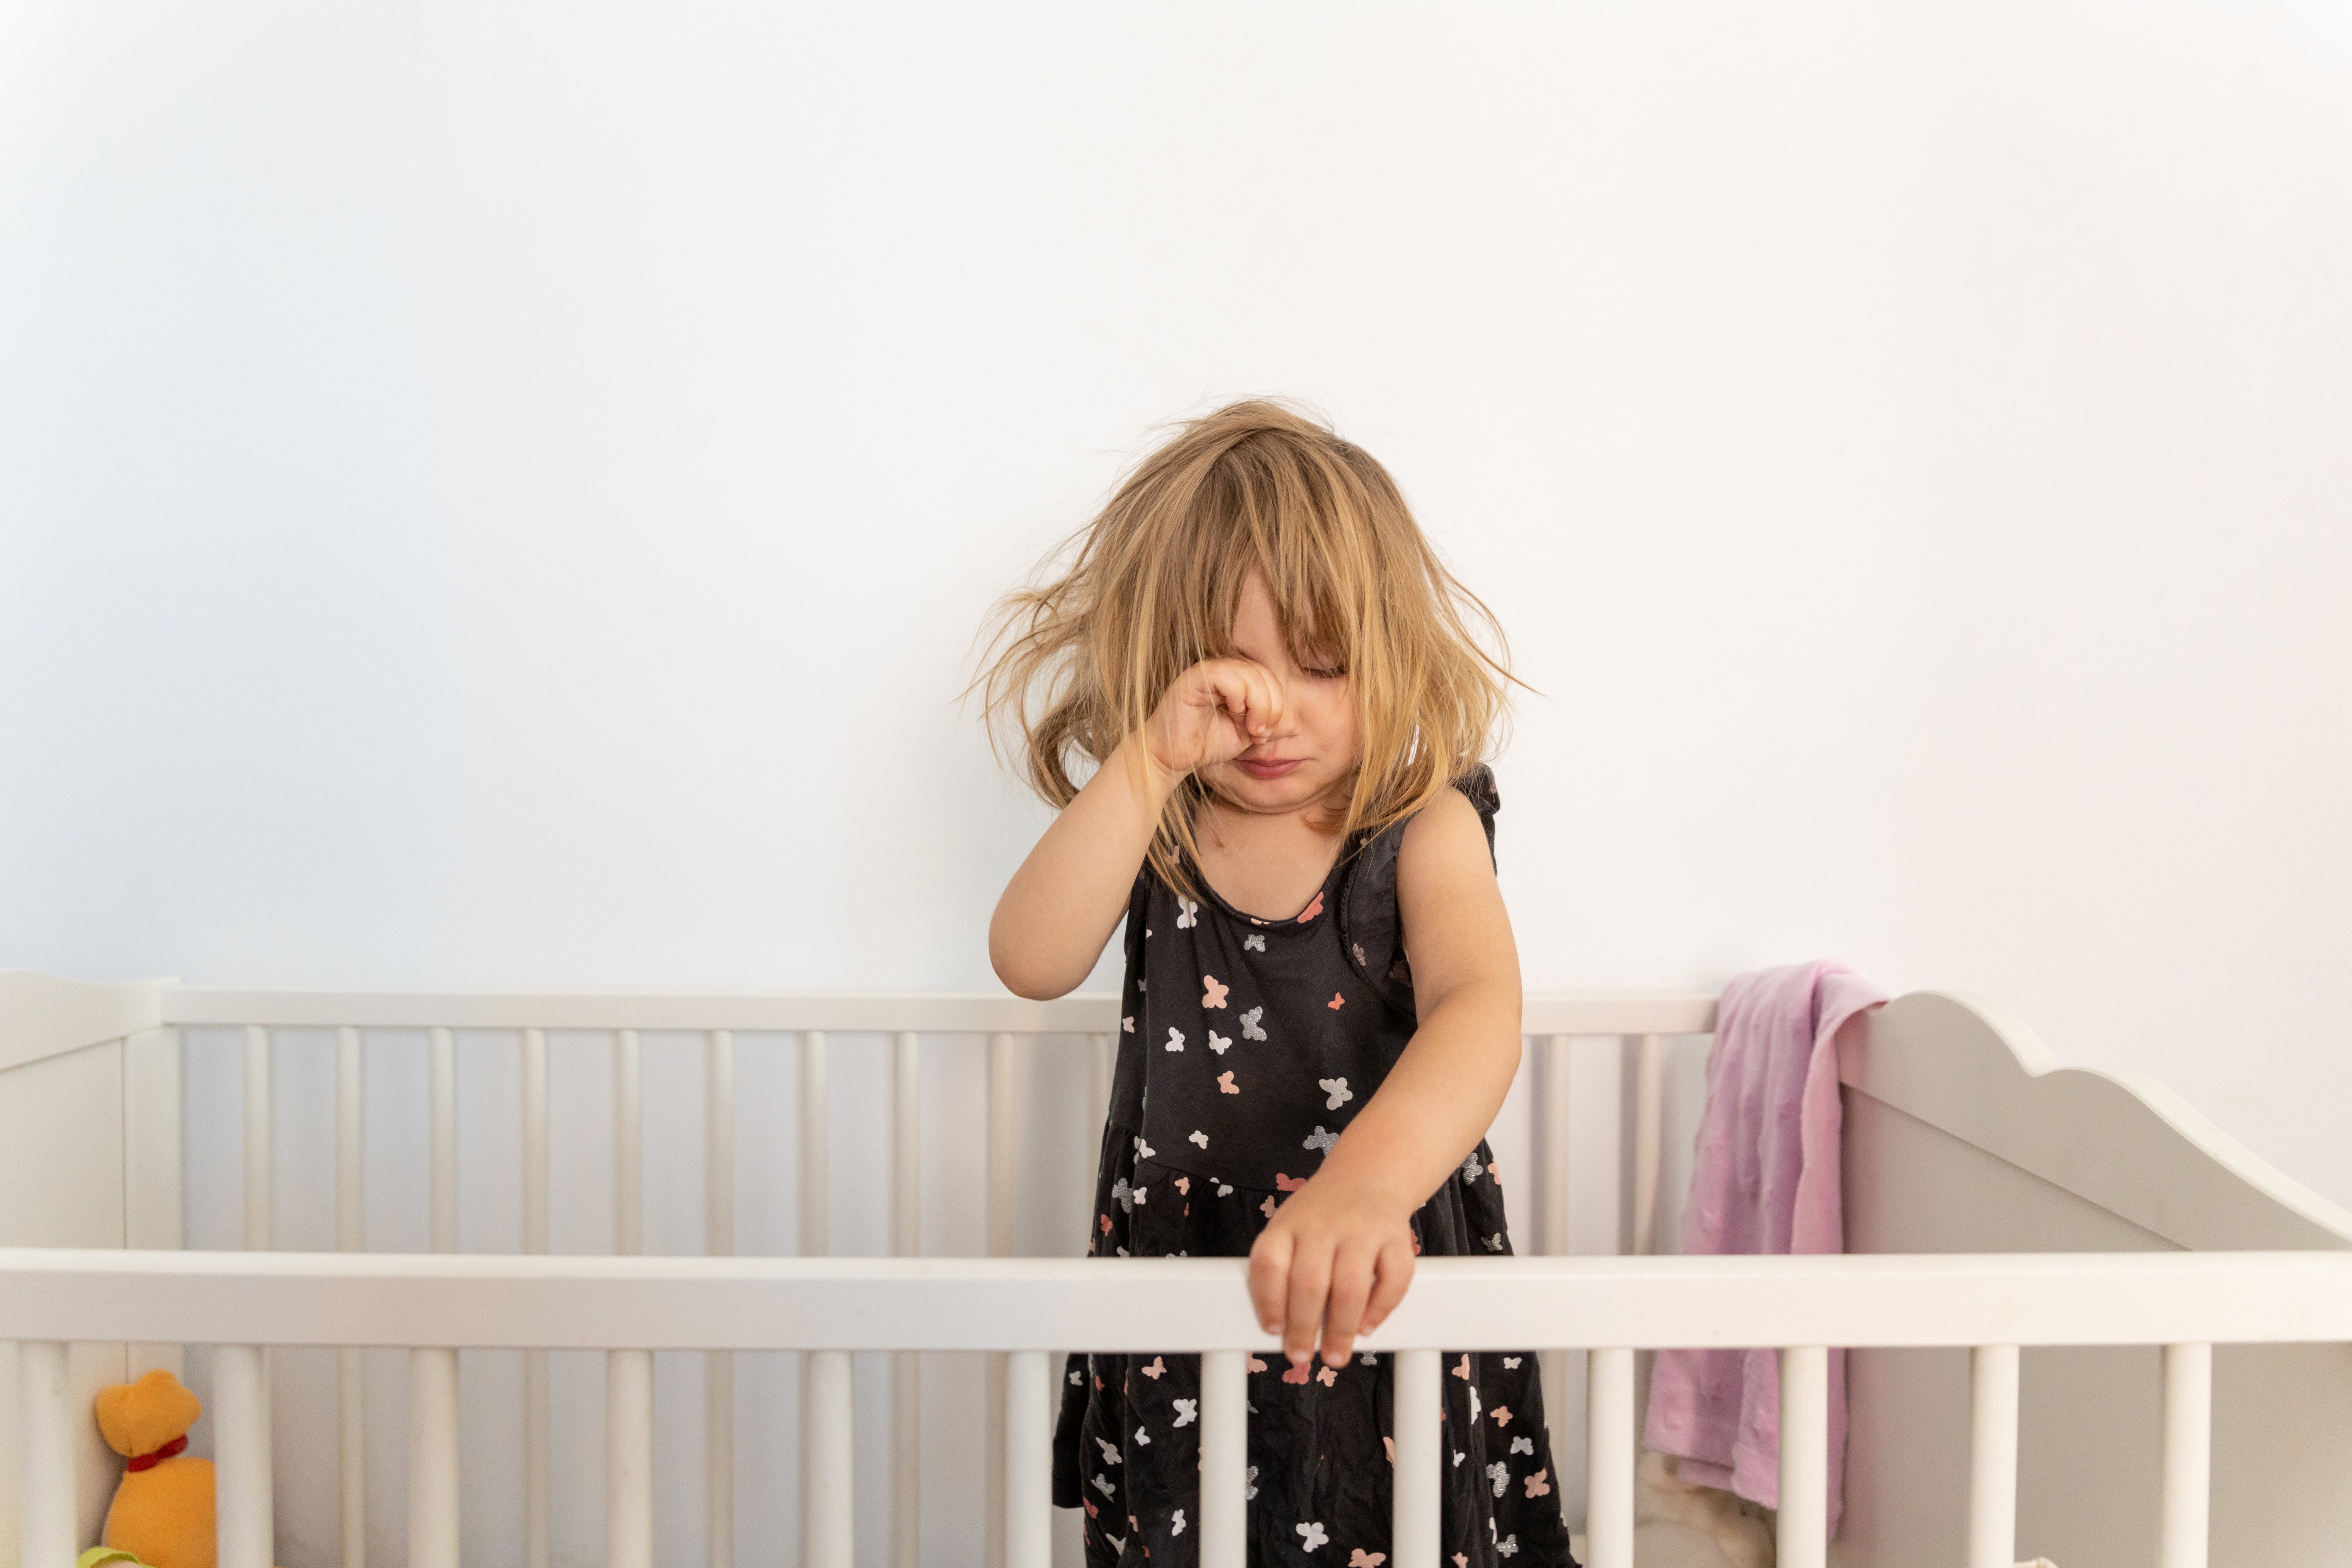 Julia sat up in her crib waiting for her mother. | Source: Getty Images